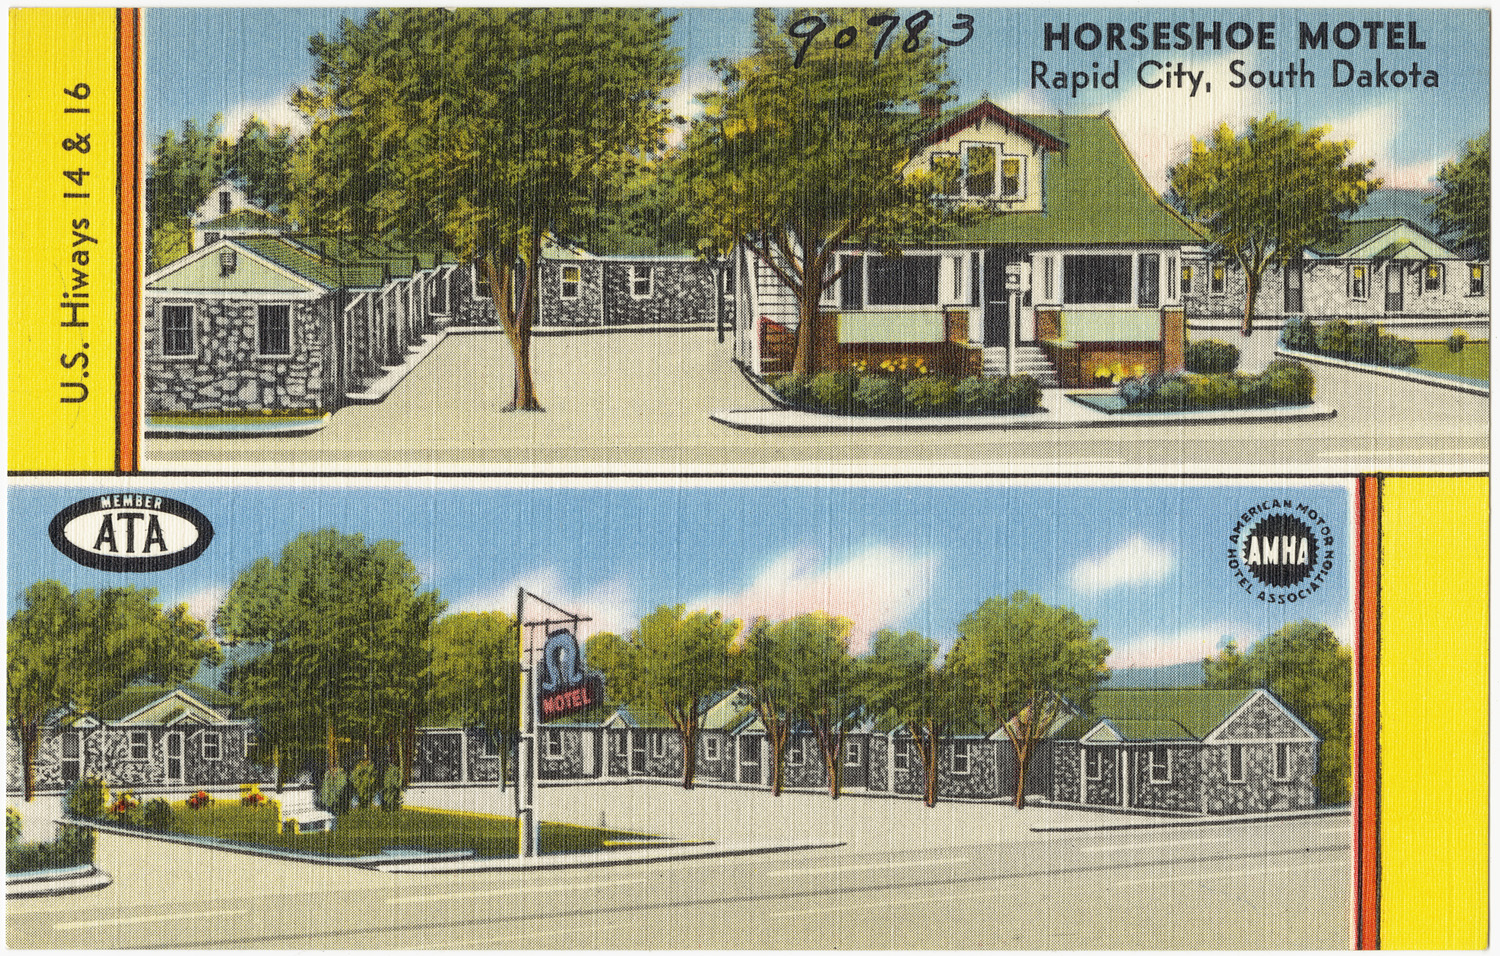 two vintage images of the homes in the neighborhood